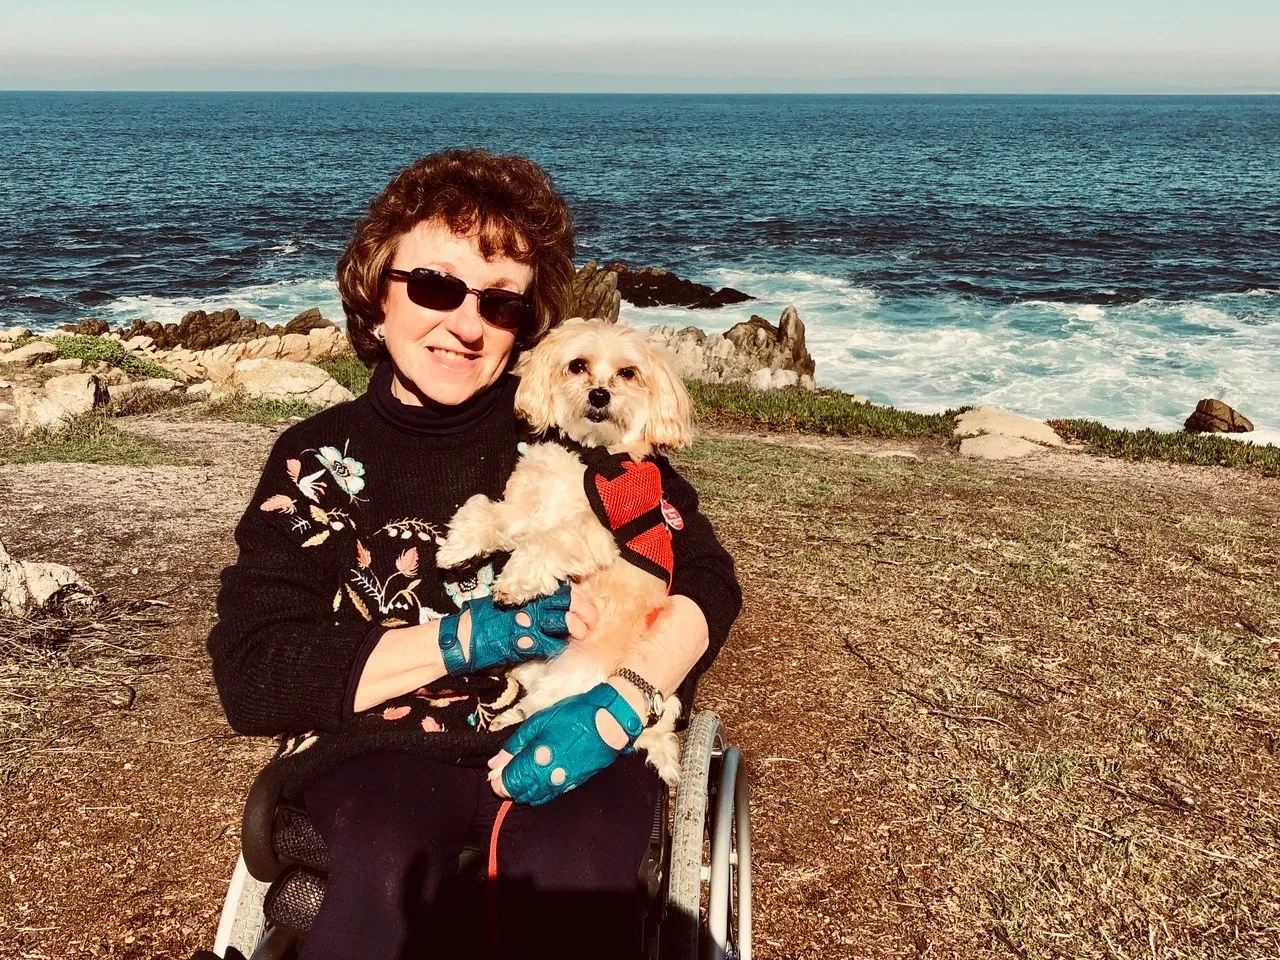 A Woman sitting in the wheel chair and holding a puppy